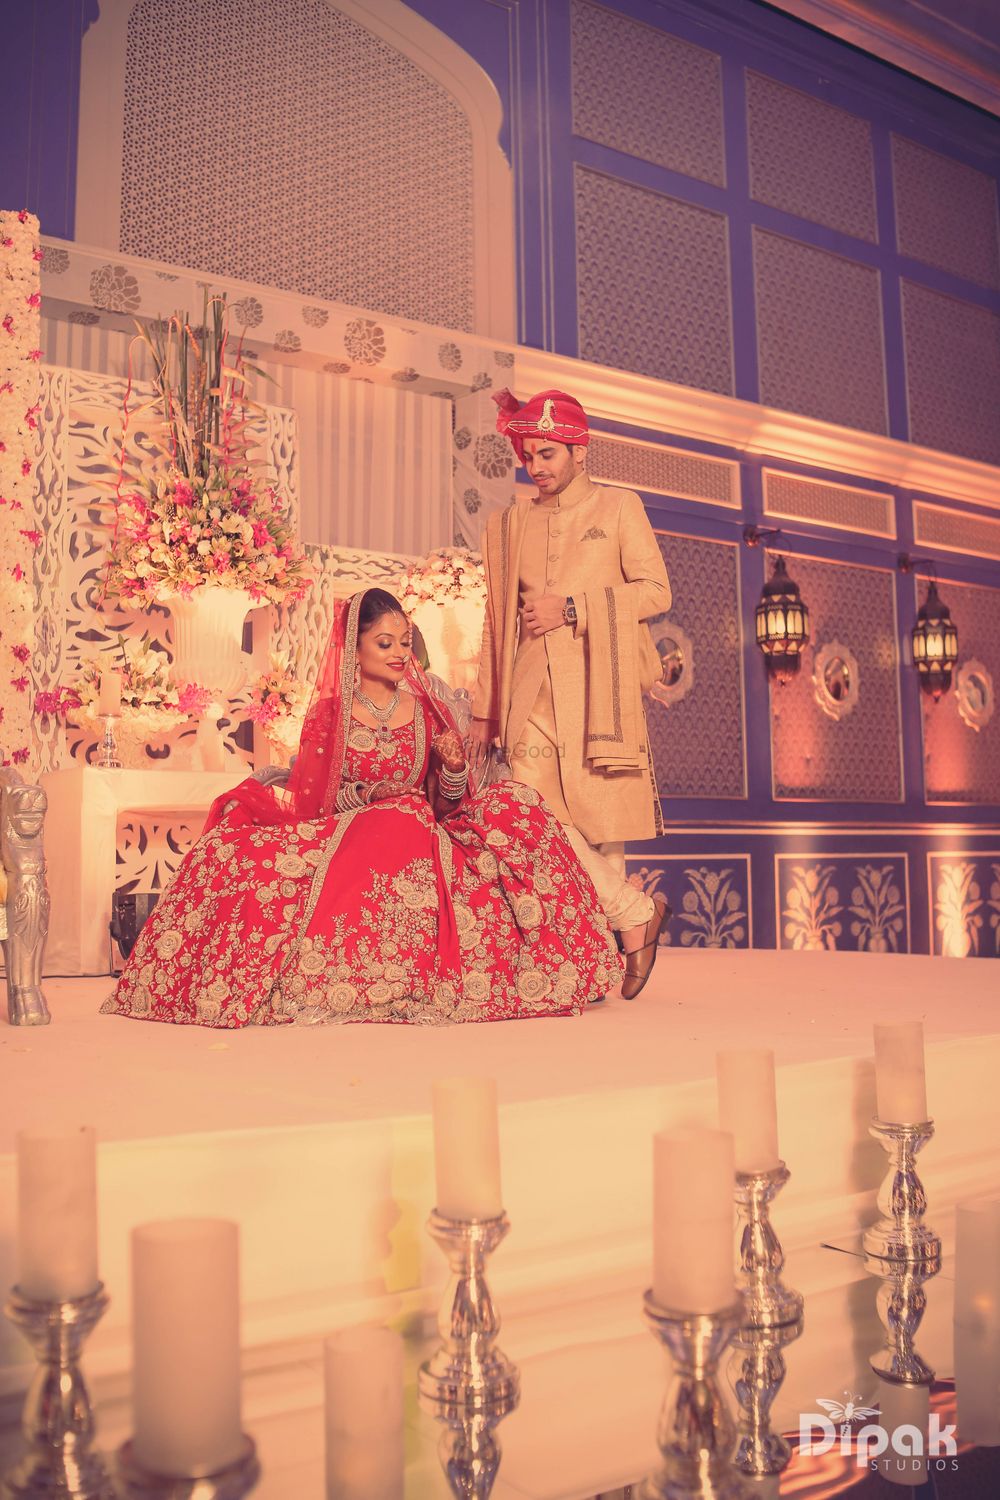 Photo of Bride Wearing Bright Red Flared Lehenga on Stage